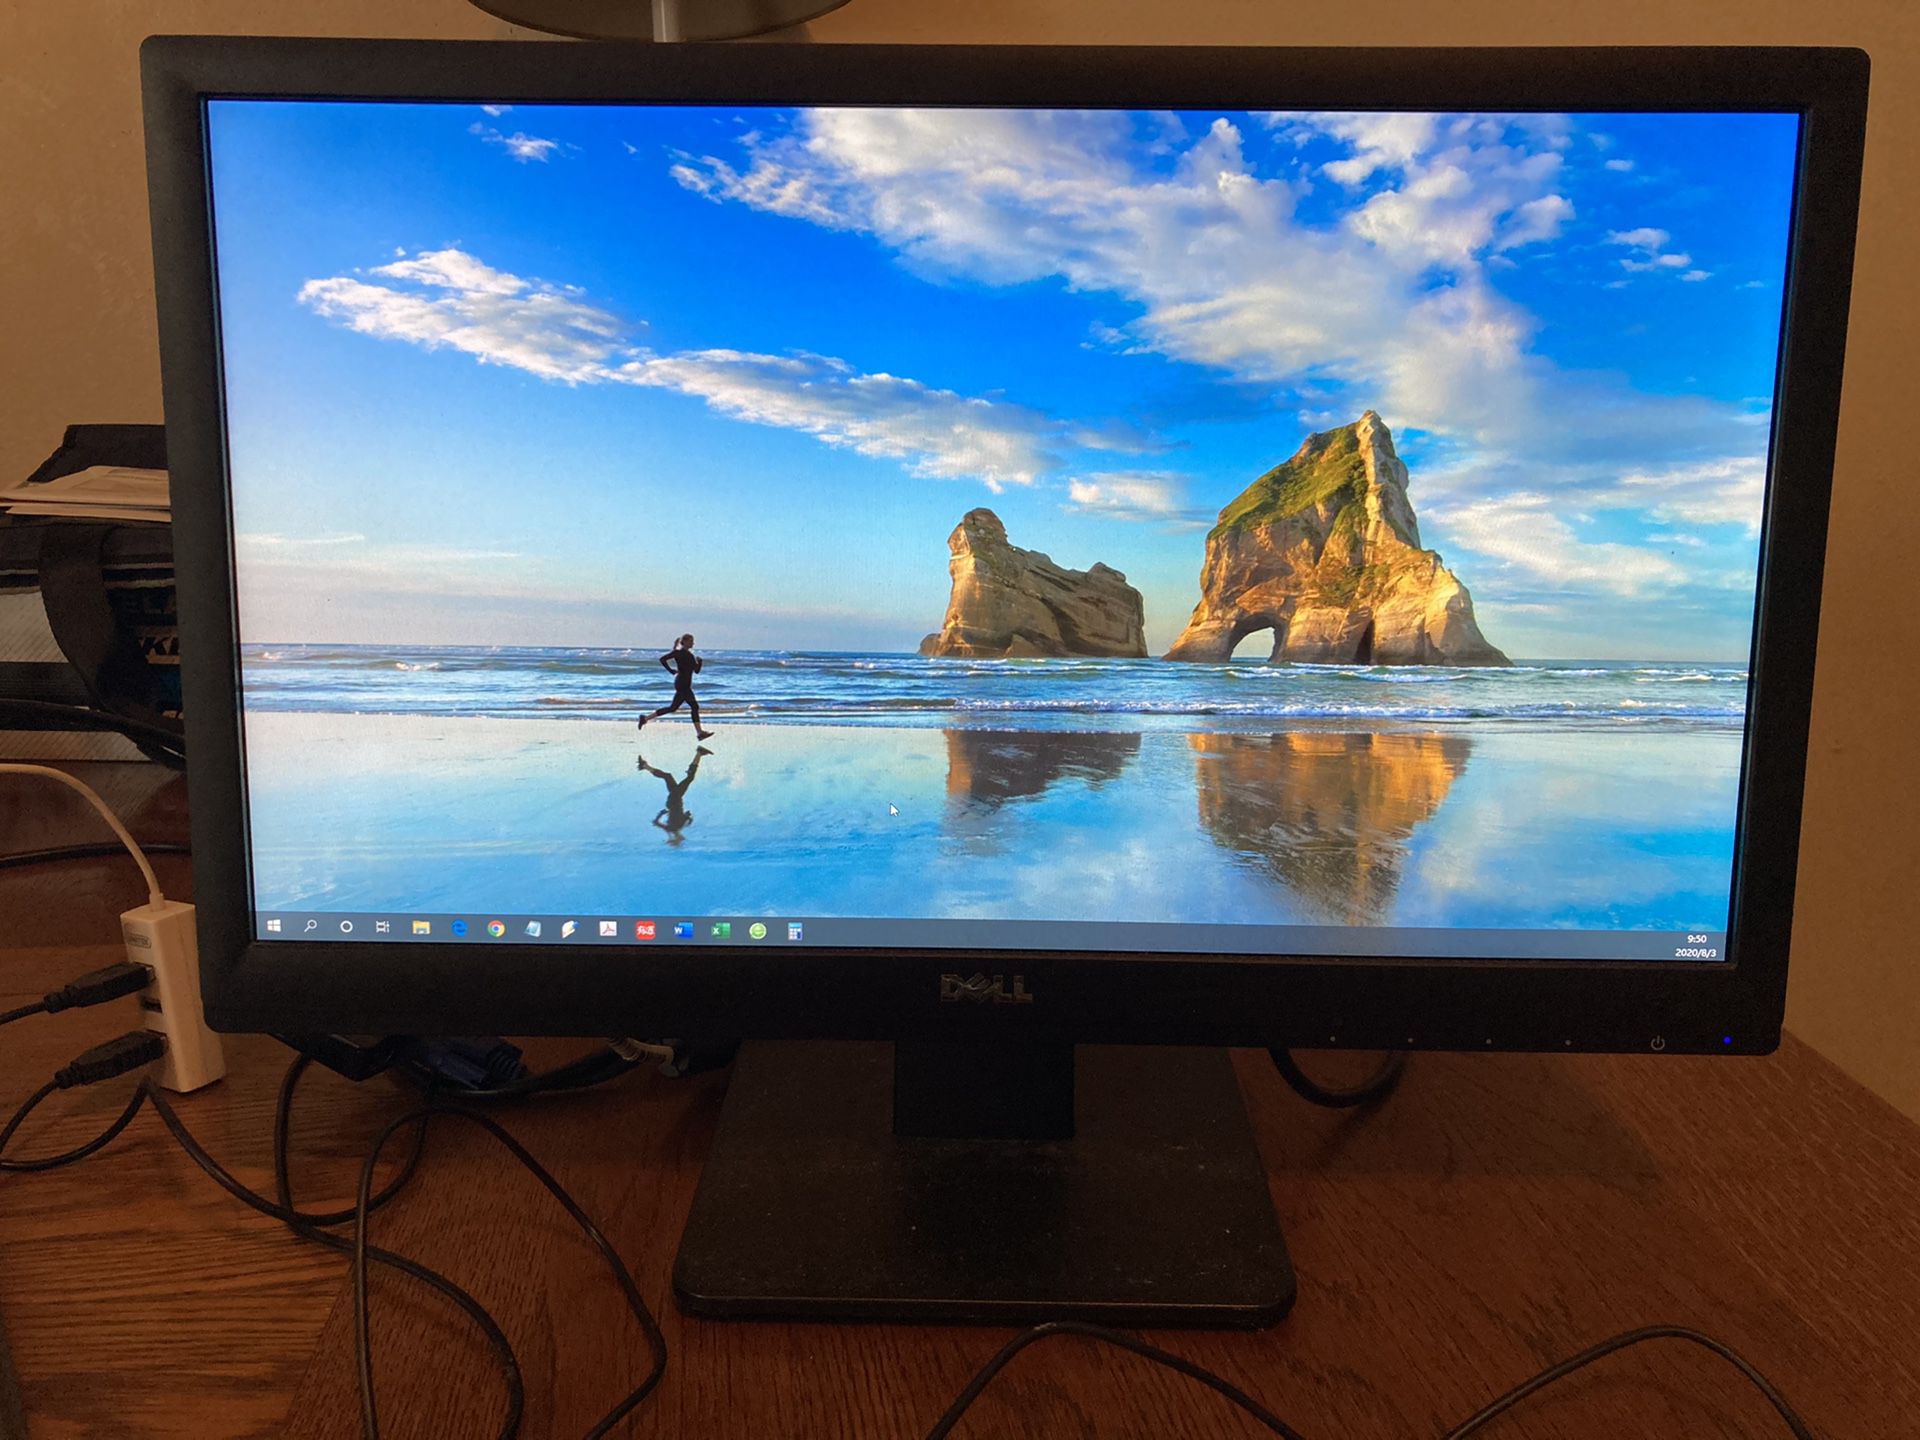 Dell D2015Hf LCD Monitor, 19.5” widescreen